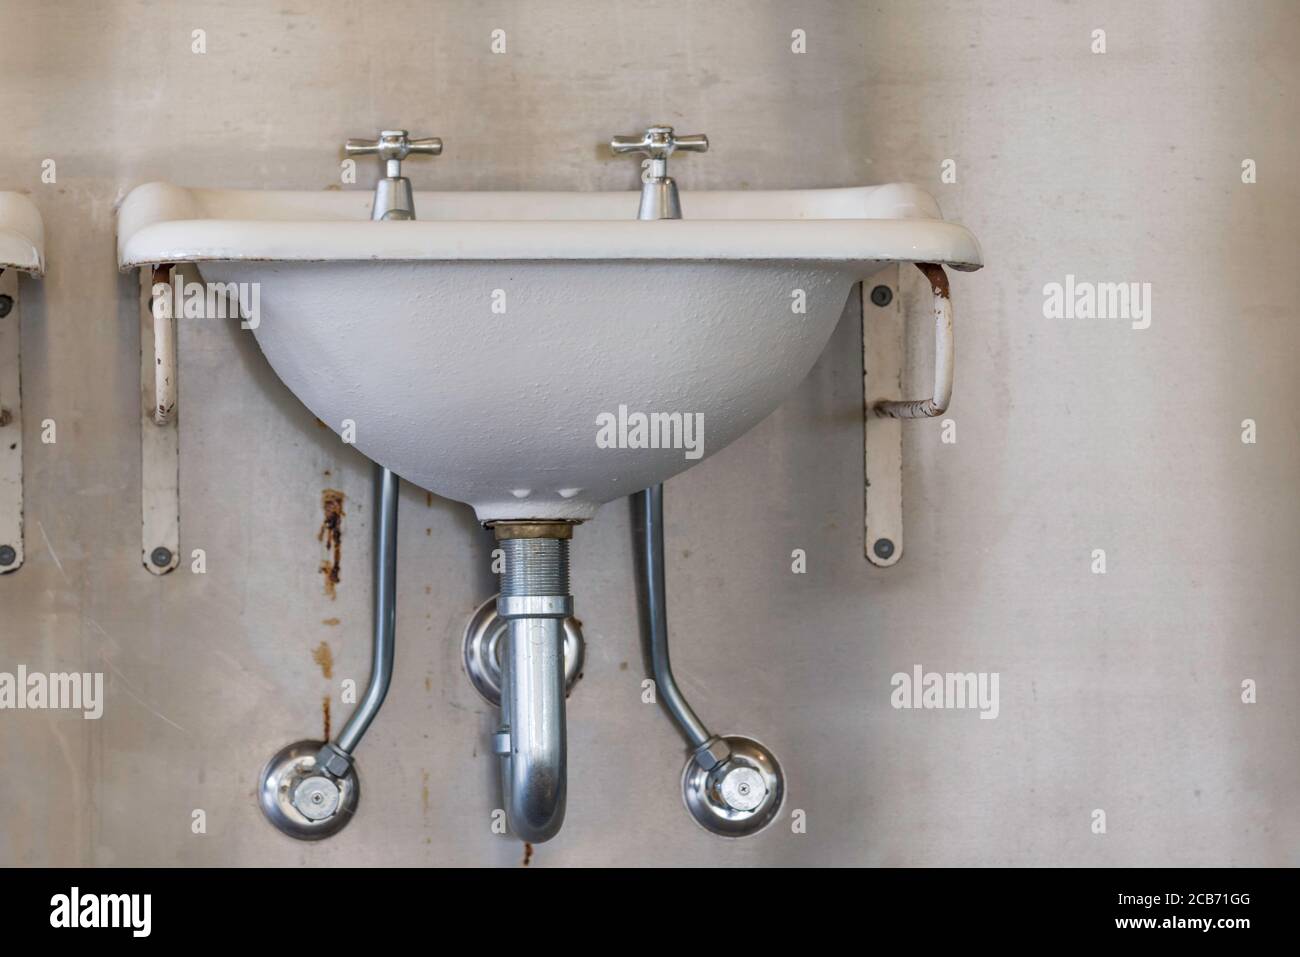 Old but restored iron baked enamel wash basins or sinks mounted on a wall at Cockatoo Island dockyard in Sydney Harbour, Australia Stock Photo